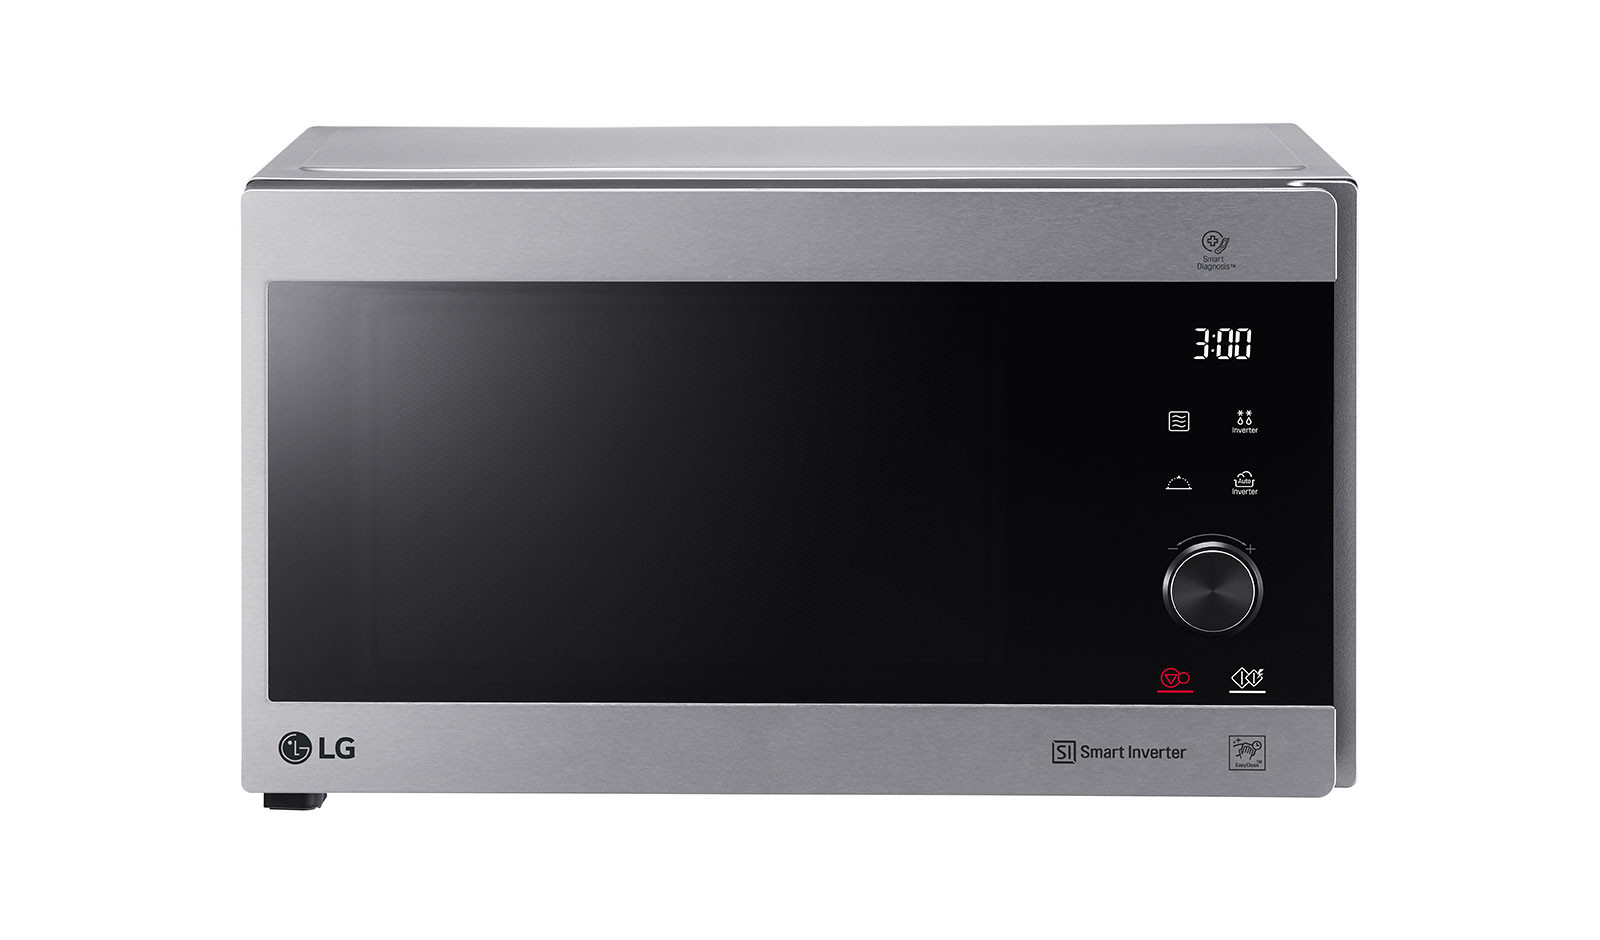 LG MH8265CIS Microwave Oven Grill Neochef - 42L